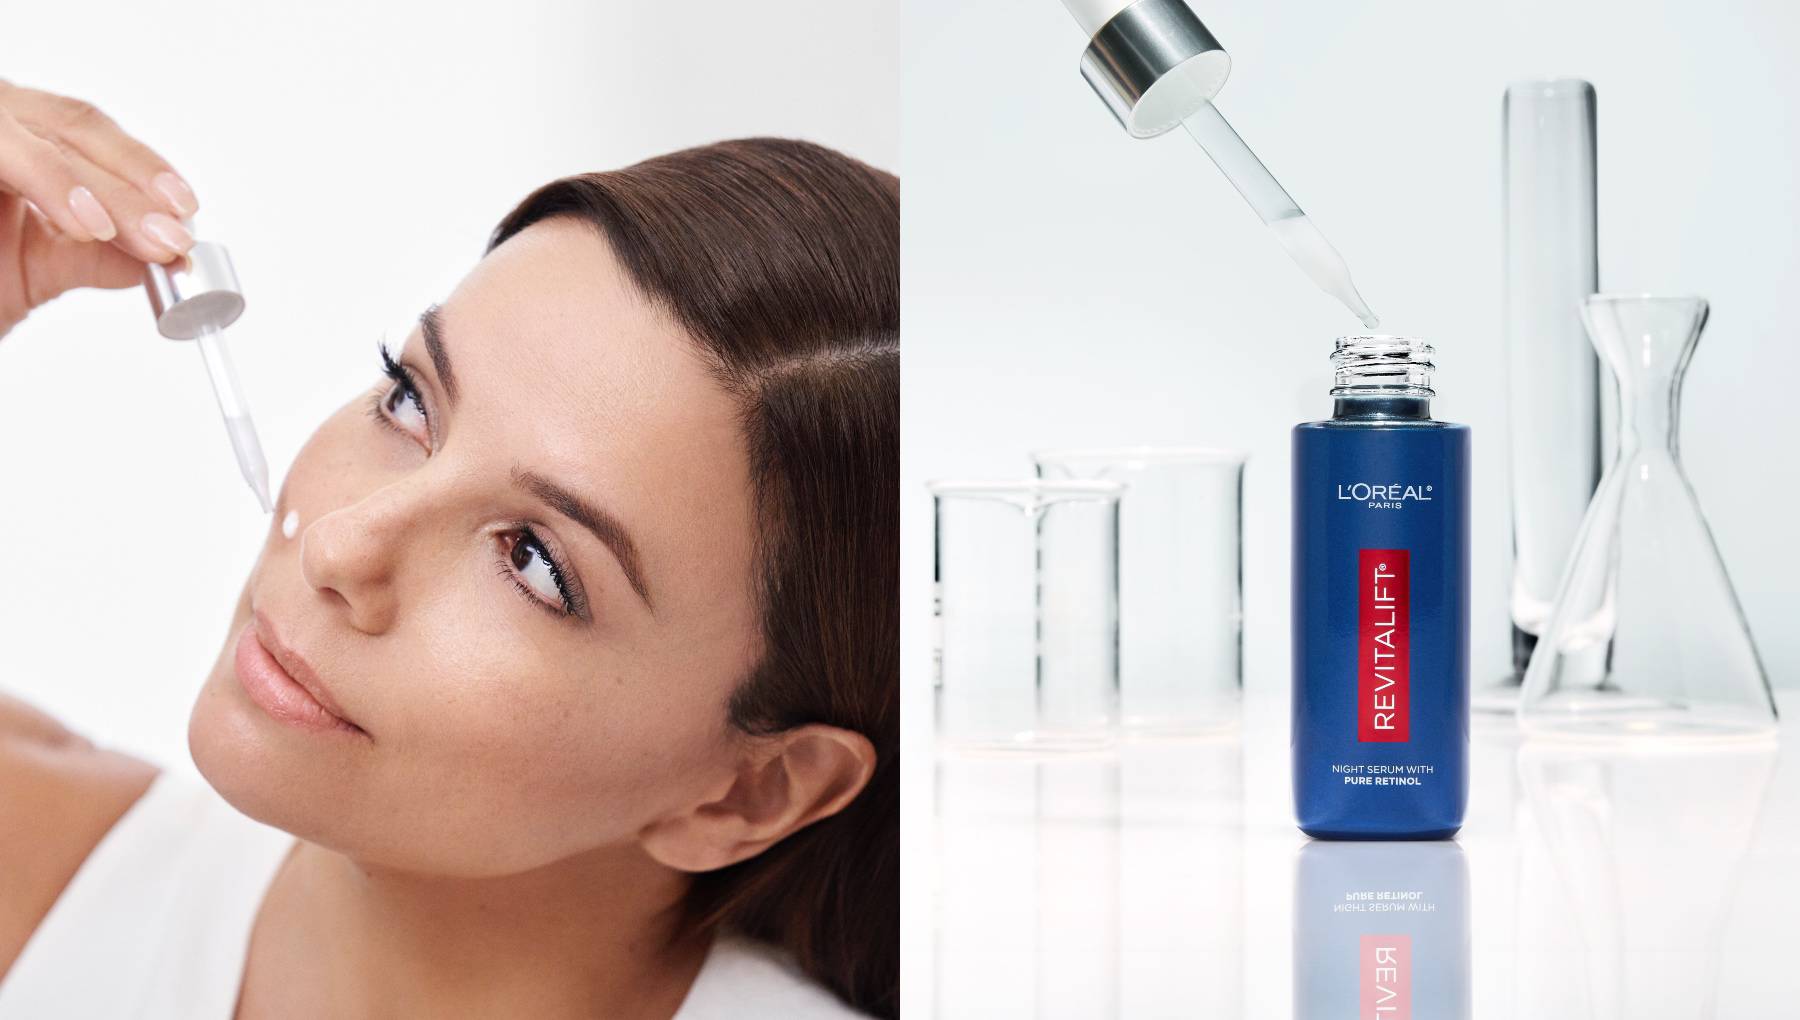 Brands like L'Oréal Paris are leaning on science-focused marketing to power skin care sales.